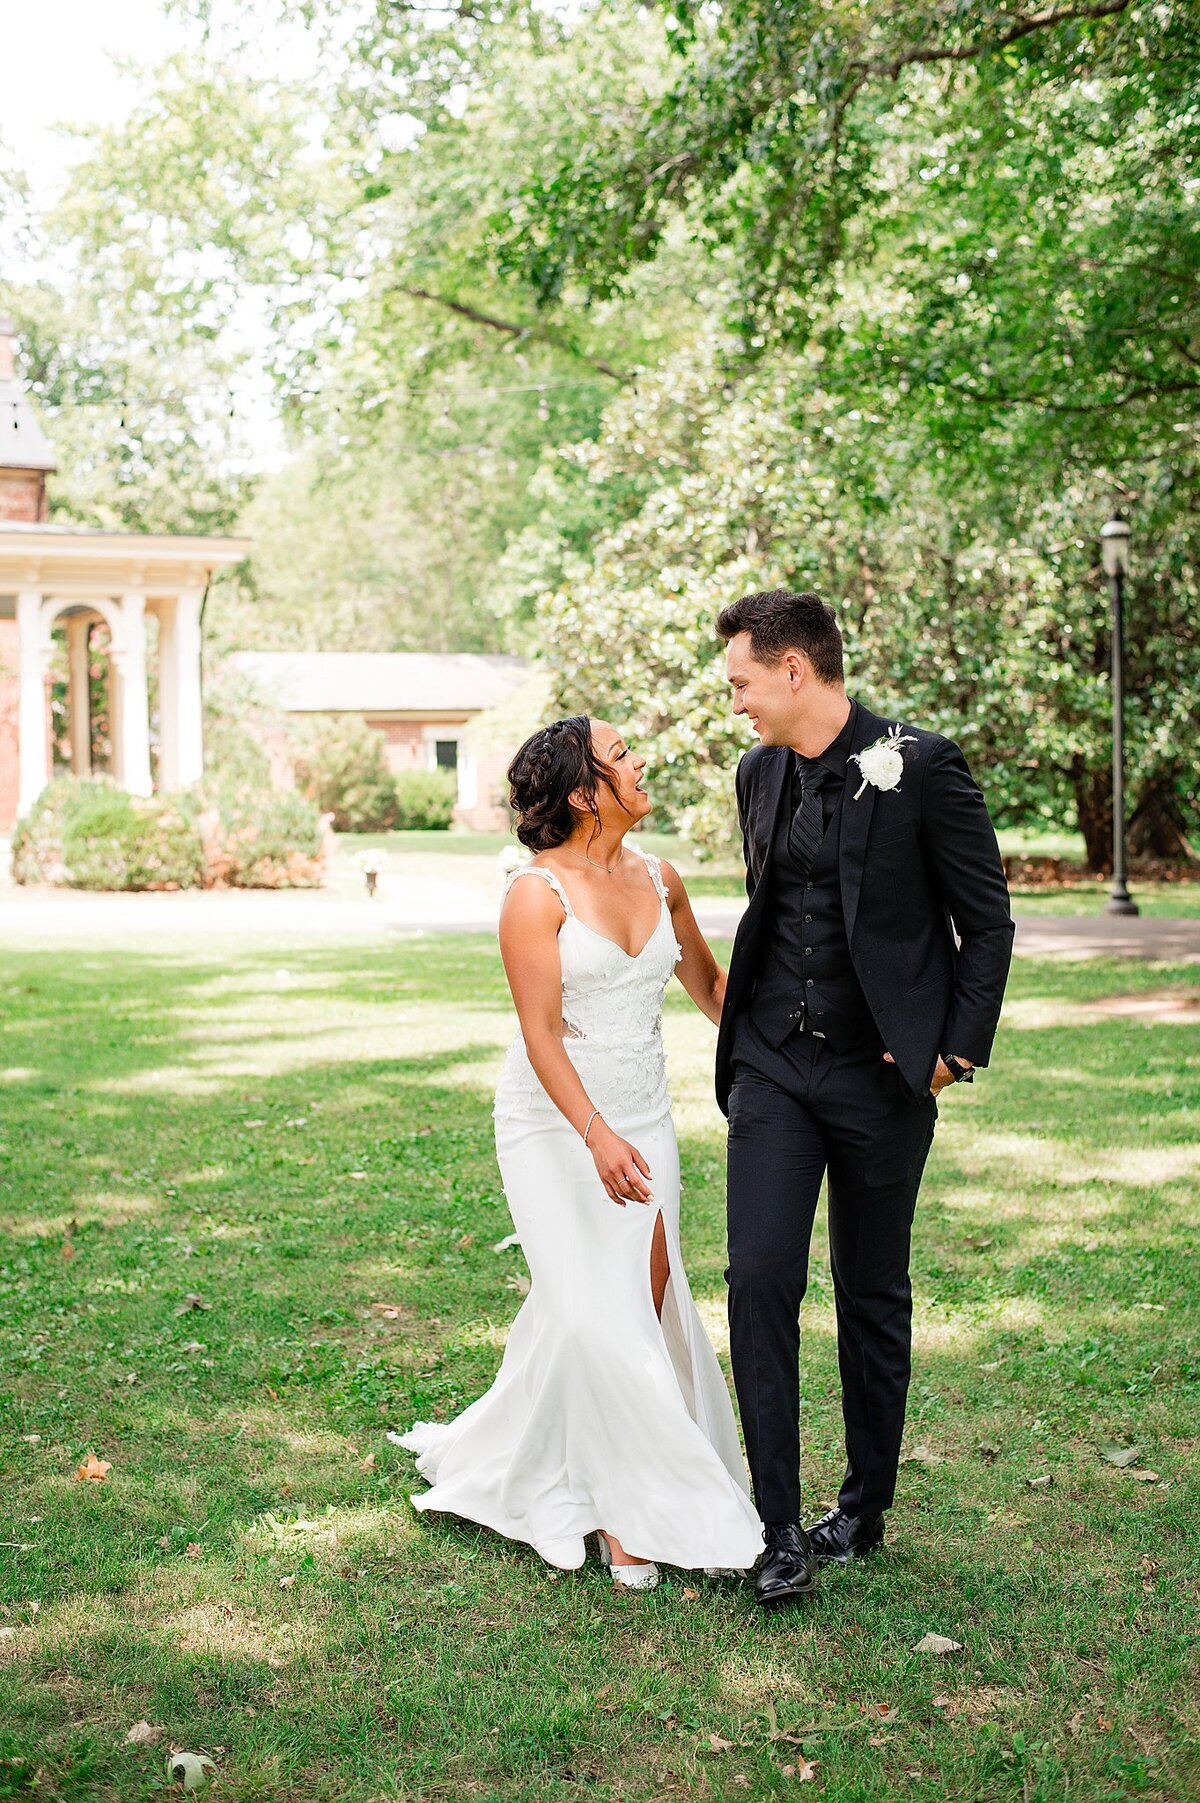 Bride wearing a fitted wedding gown with a flaired skirt and thigh high slit laughs up at the groom who is holding her hand. The groom is wearing a black suit with a black shirt and a white rose boutonniere. They are walking the grounds at Oaklands Mansion.